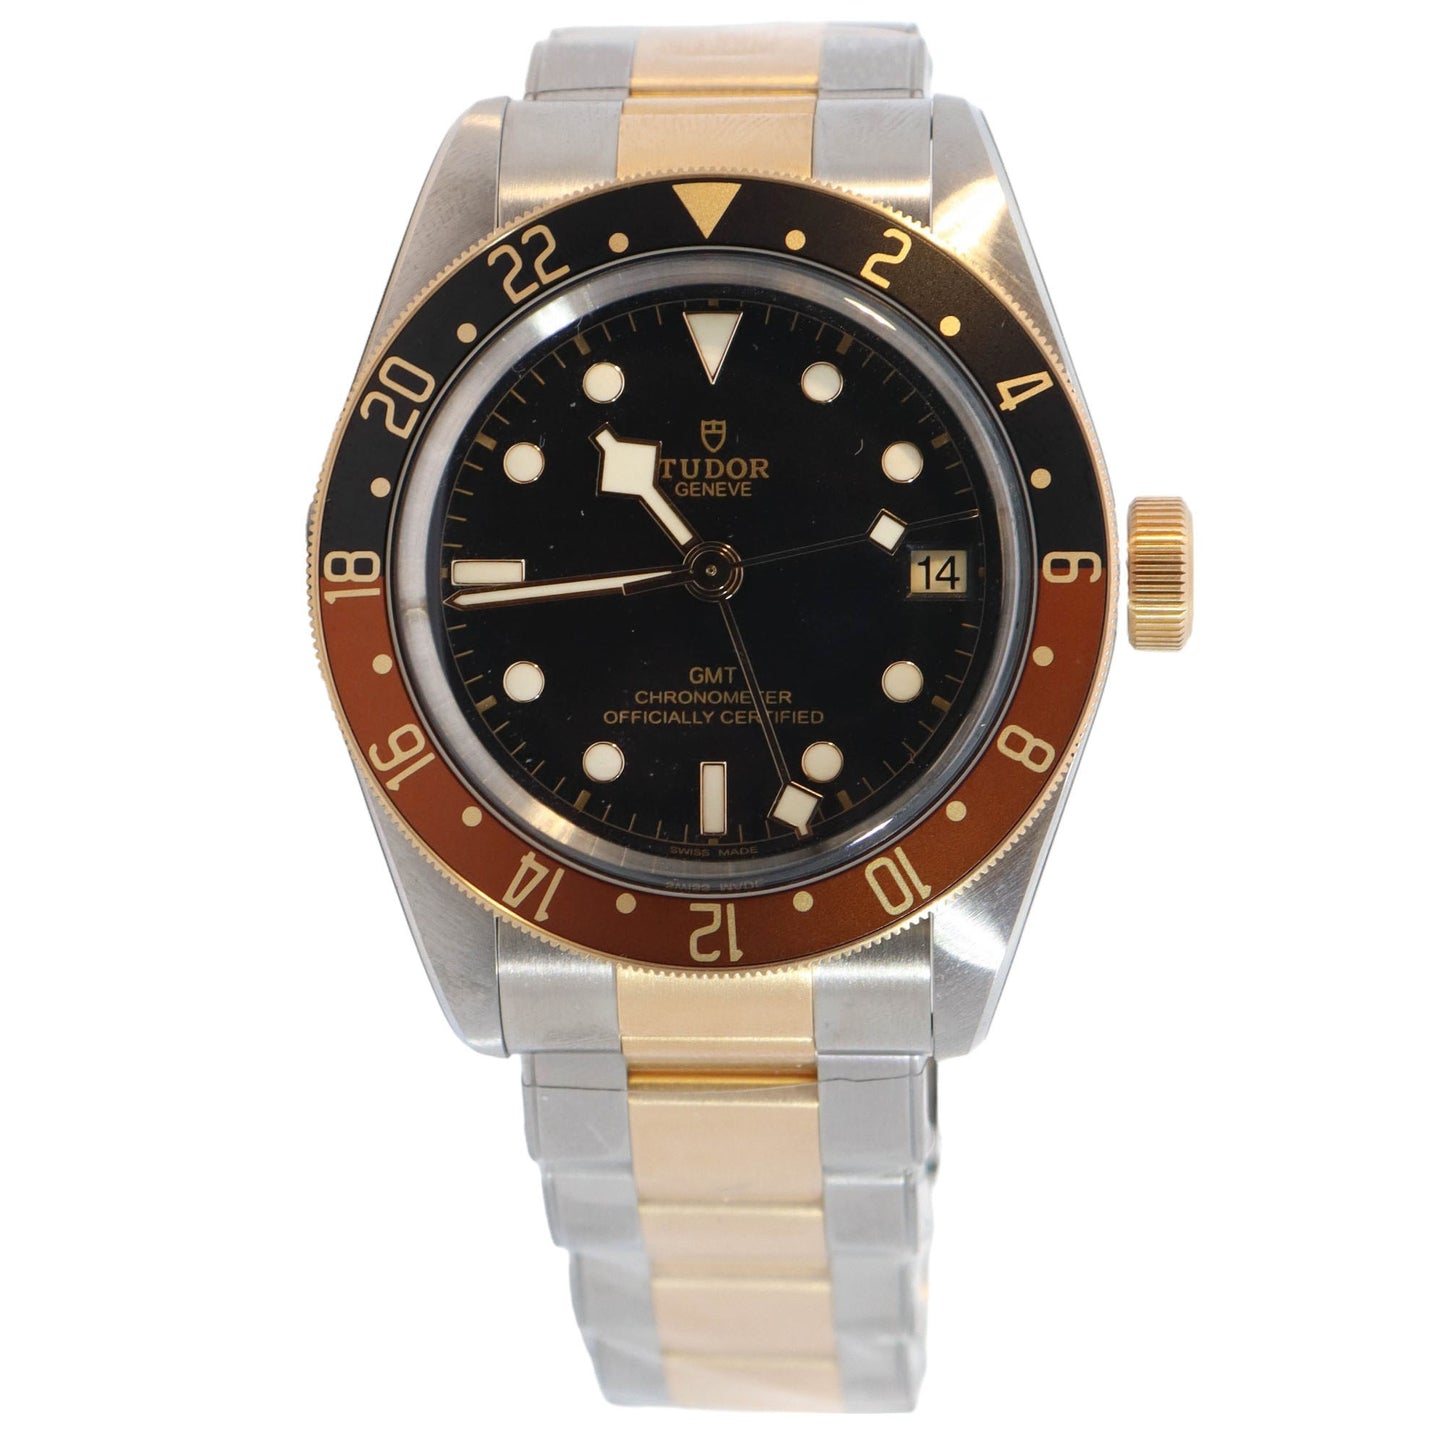 Tudor Black Bay GMT Two-Tone Stainless Steel & Yellow Gold 41mm Black Dot Dial Watch Reference# 79833MN